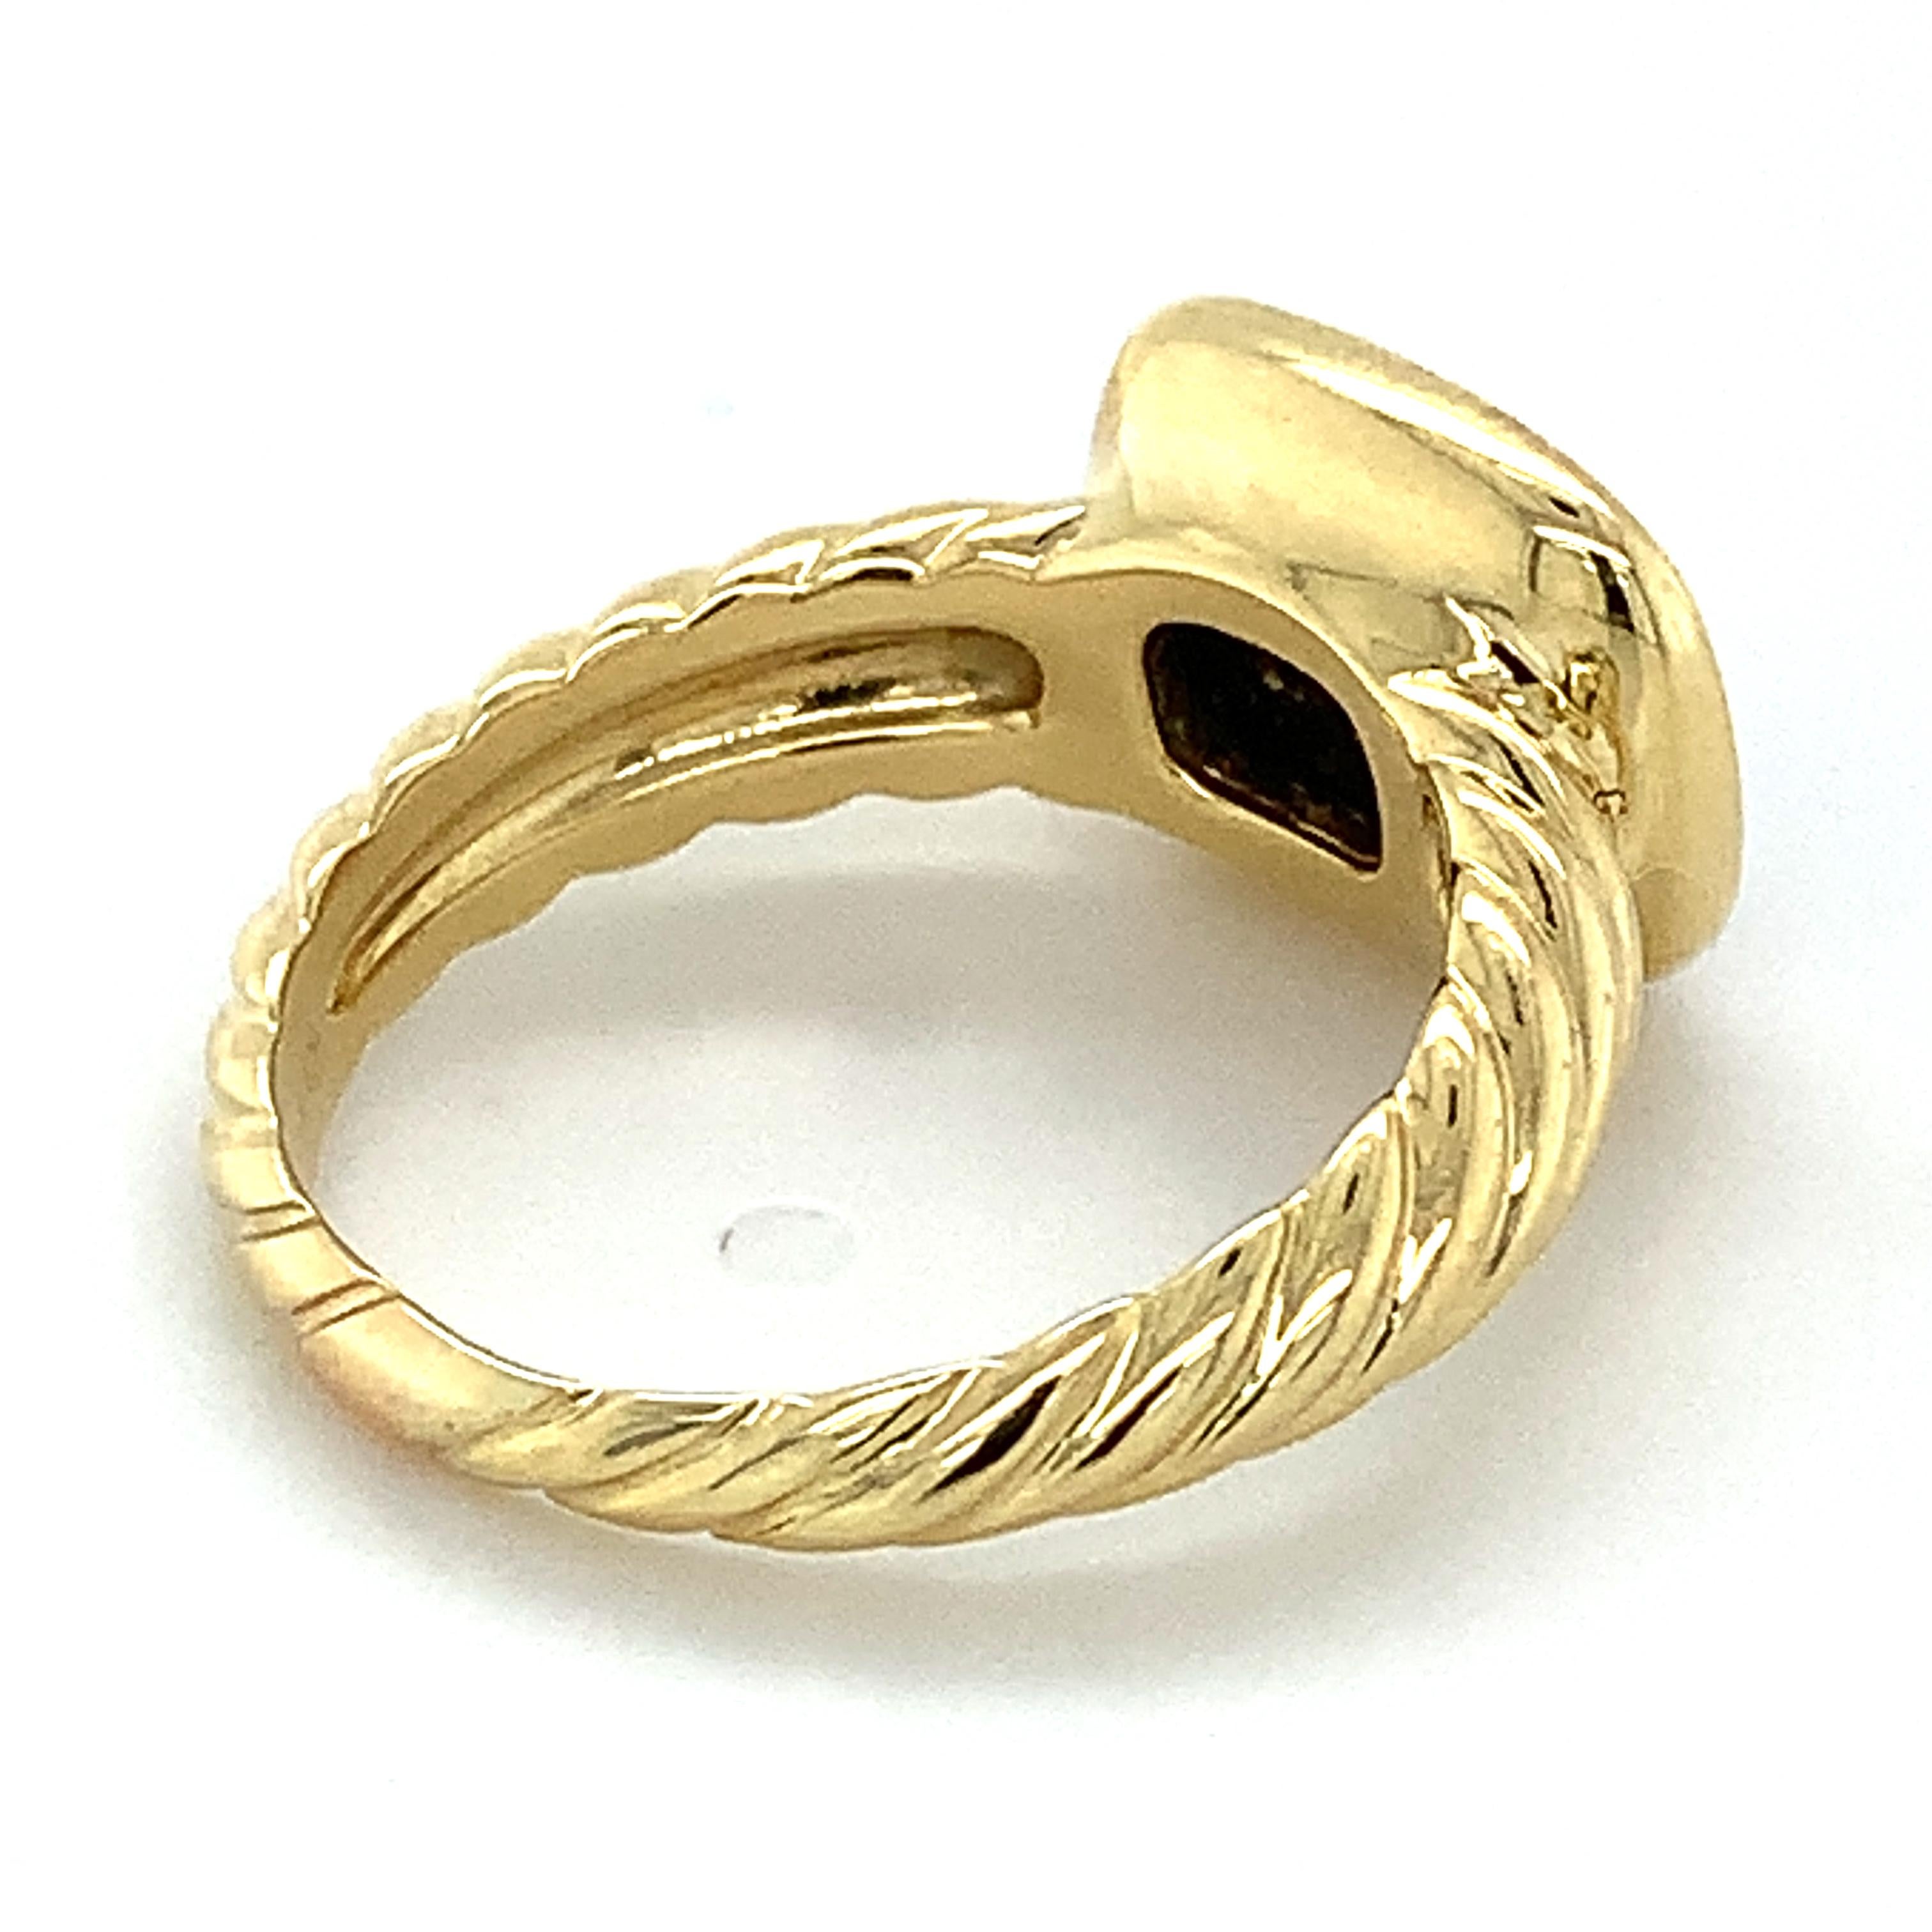 Women's or Men's David Yurman 18k Yellow Gold Round Diamond Pave Noblesse Cable Ring